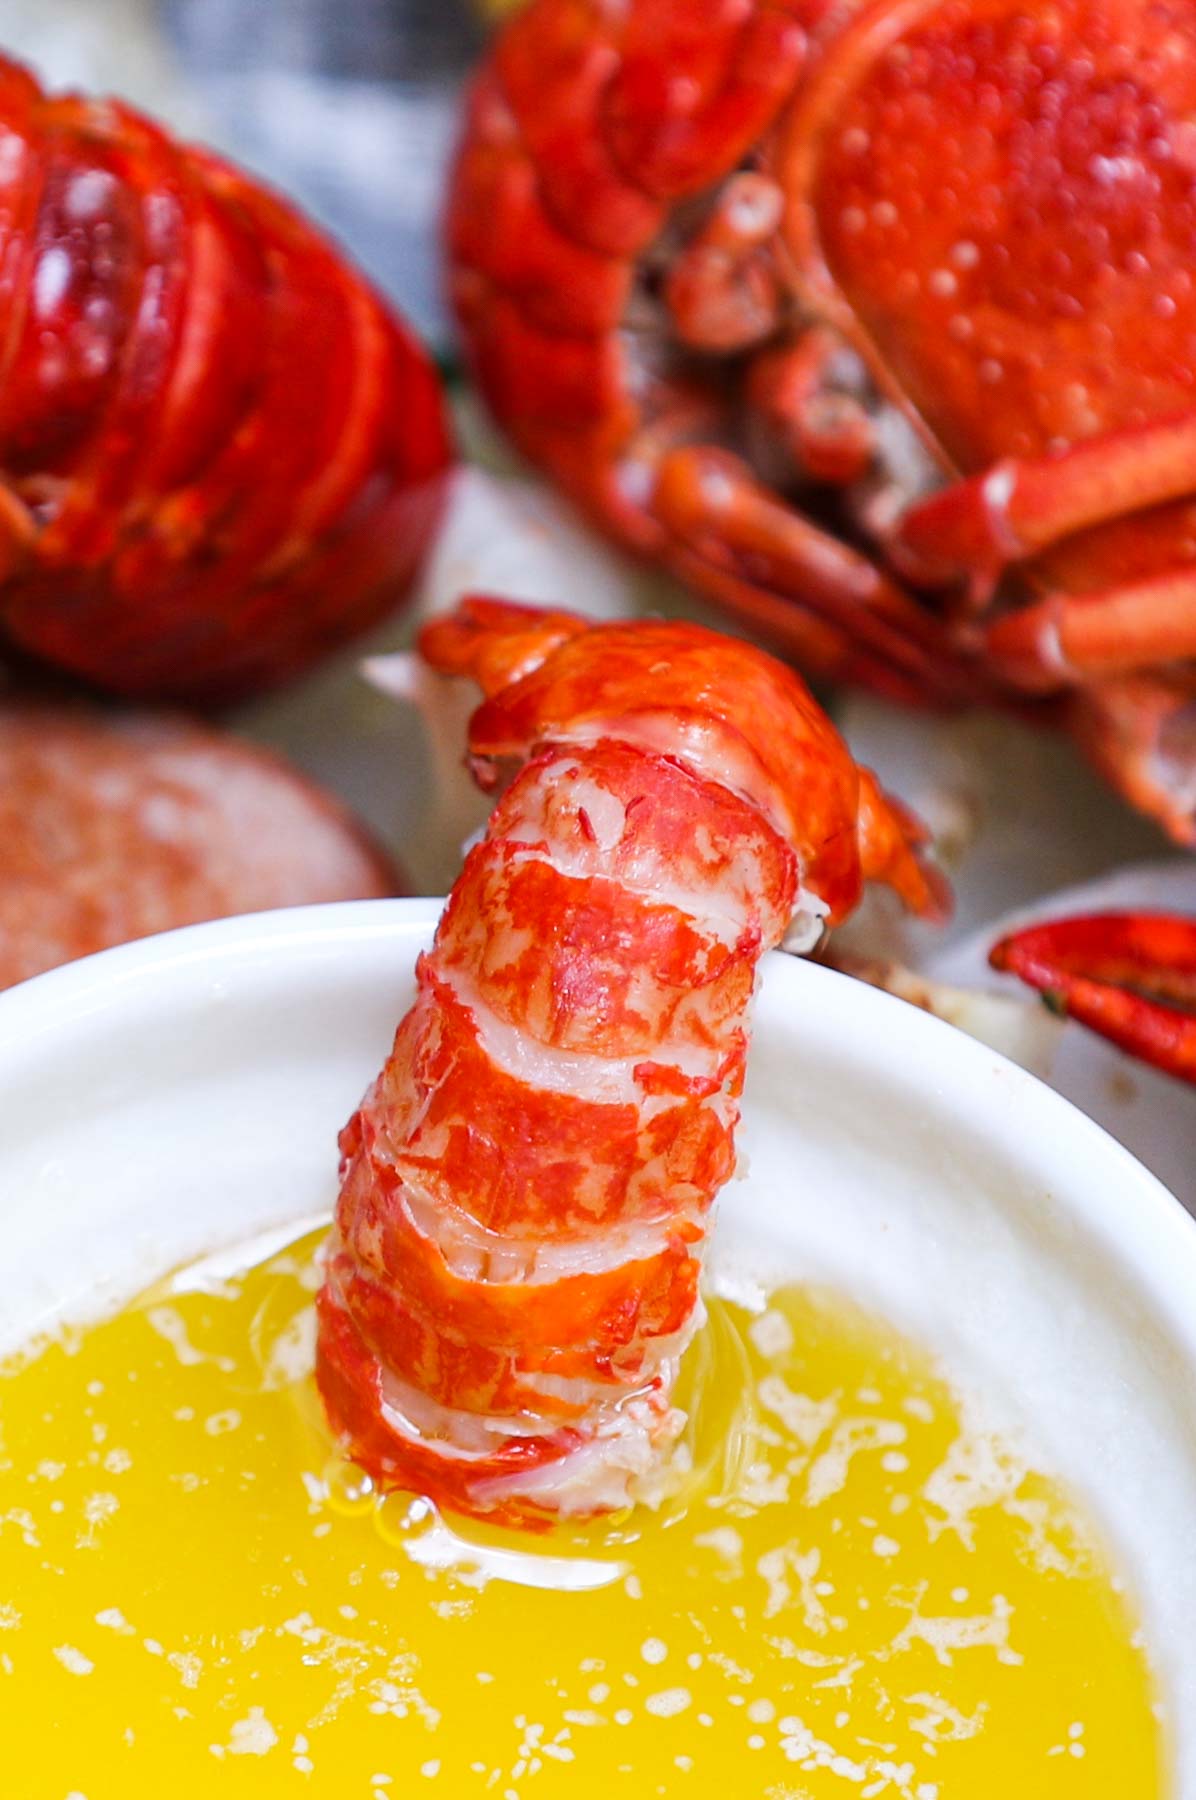 This Louisiana Crawfish Boil contains crawfish, corn, potatoes, and smoked sausage, all boiled in Old Bay seasoning flavored Cajun-style broth. Serve it with the classic seafood garlic butter sauce for the ultimate crawfish boil recipe.